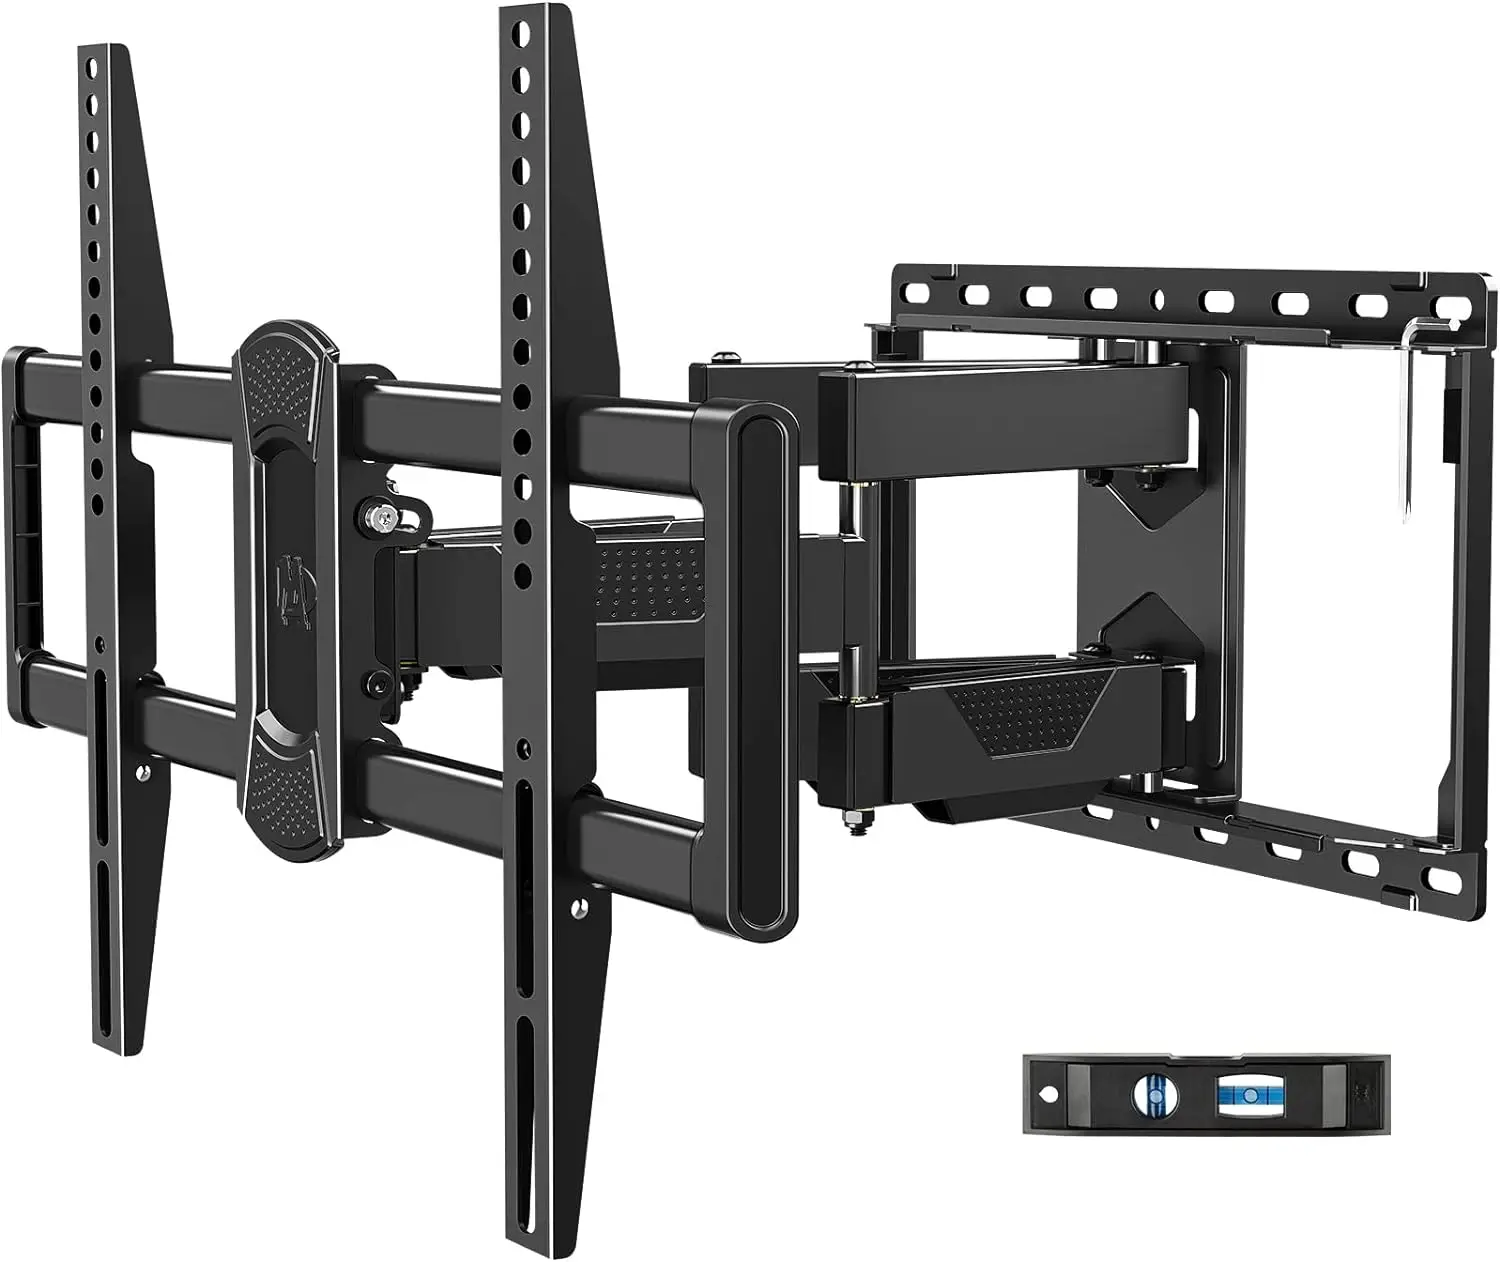 mounting-dream-ul-listed-tv-wall-mount-for-most-42-84-inch-tv-full-motion-tv-mount-with-swivel-and-tilt-tv-bracket